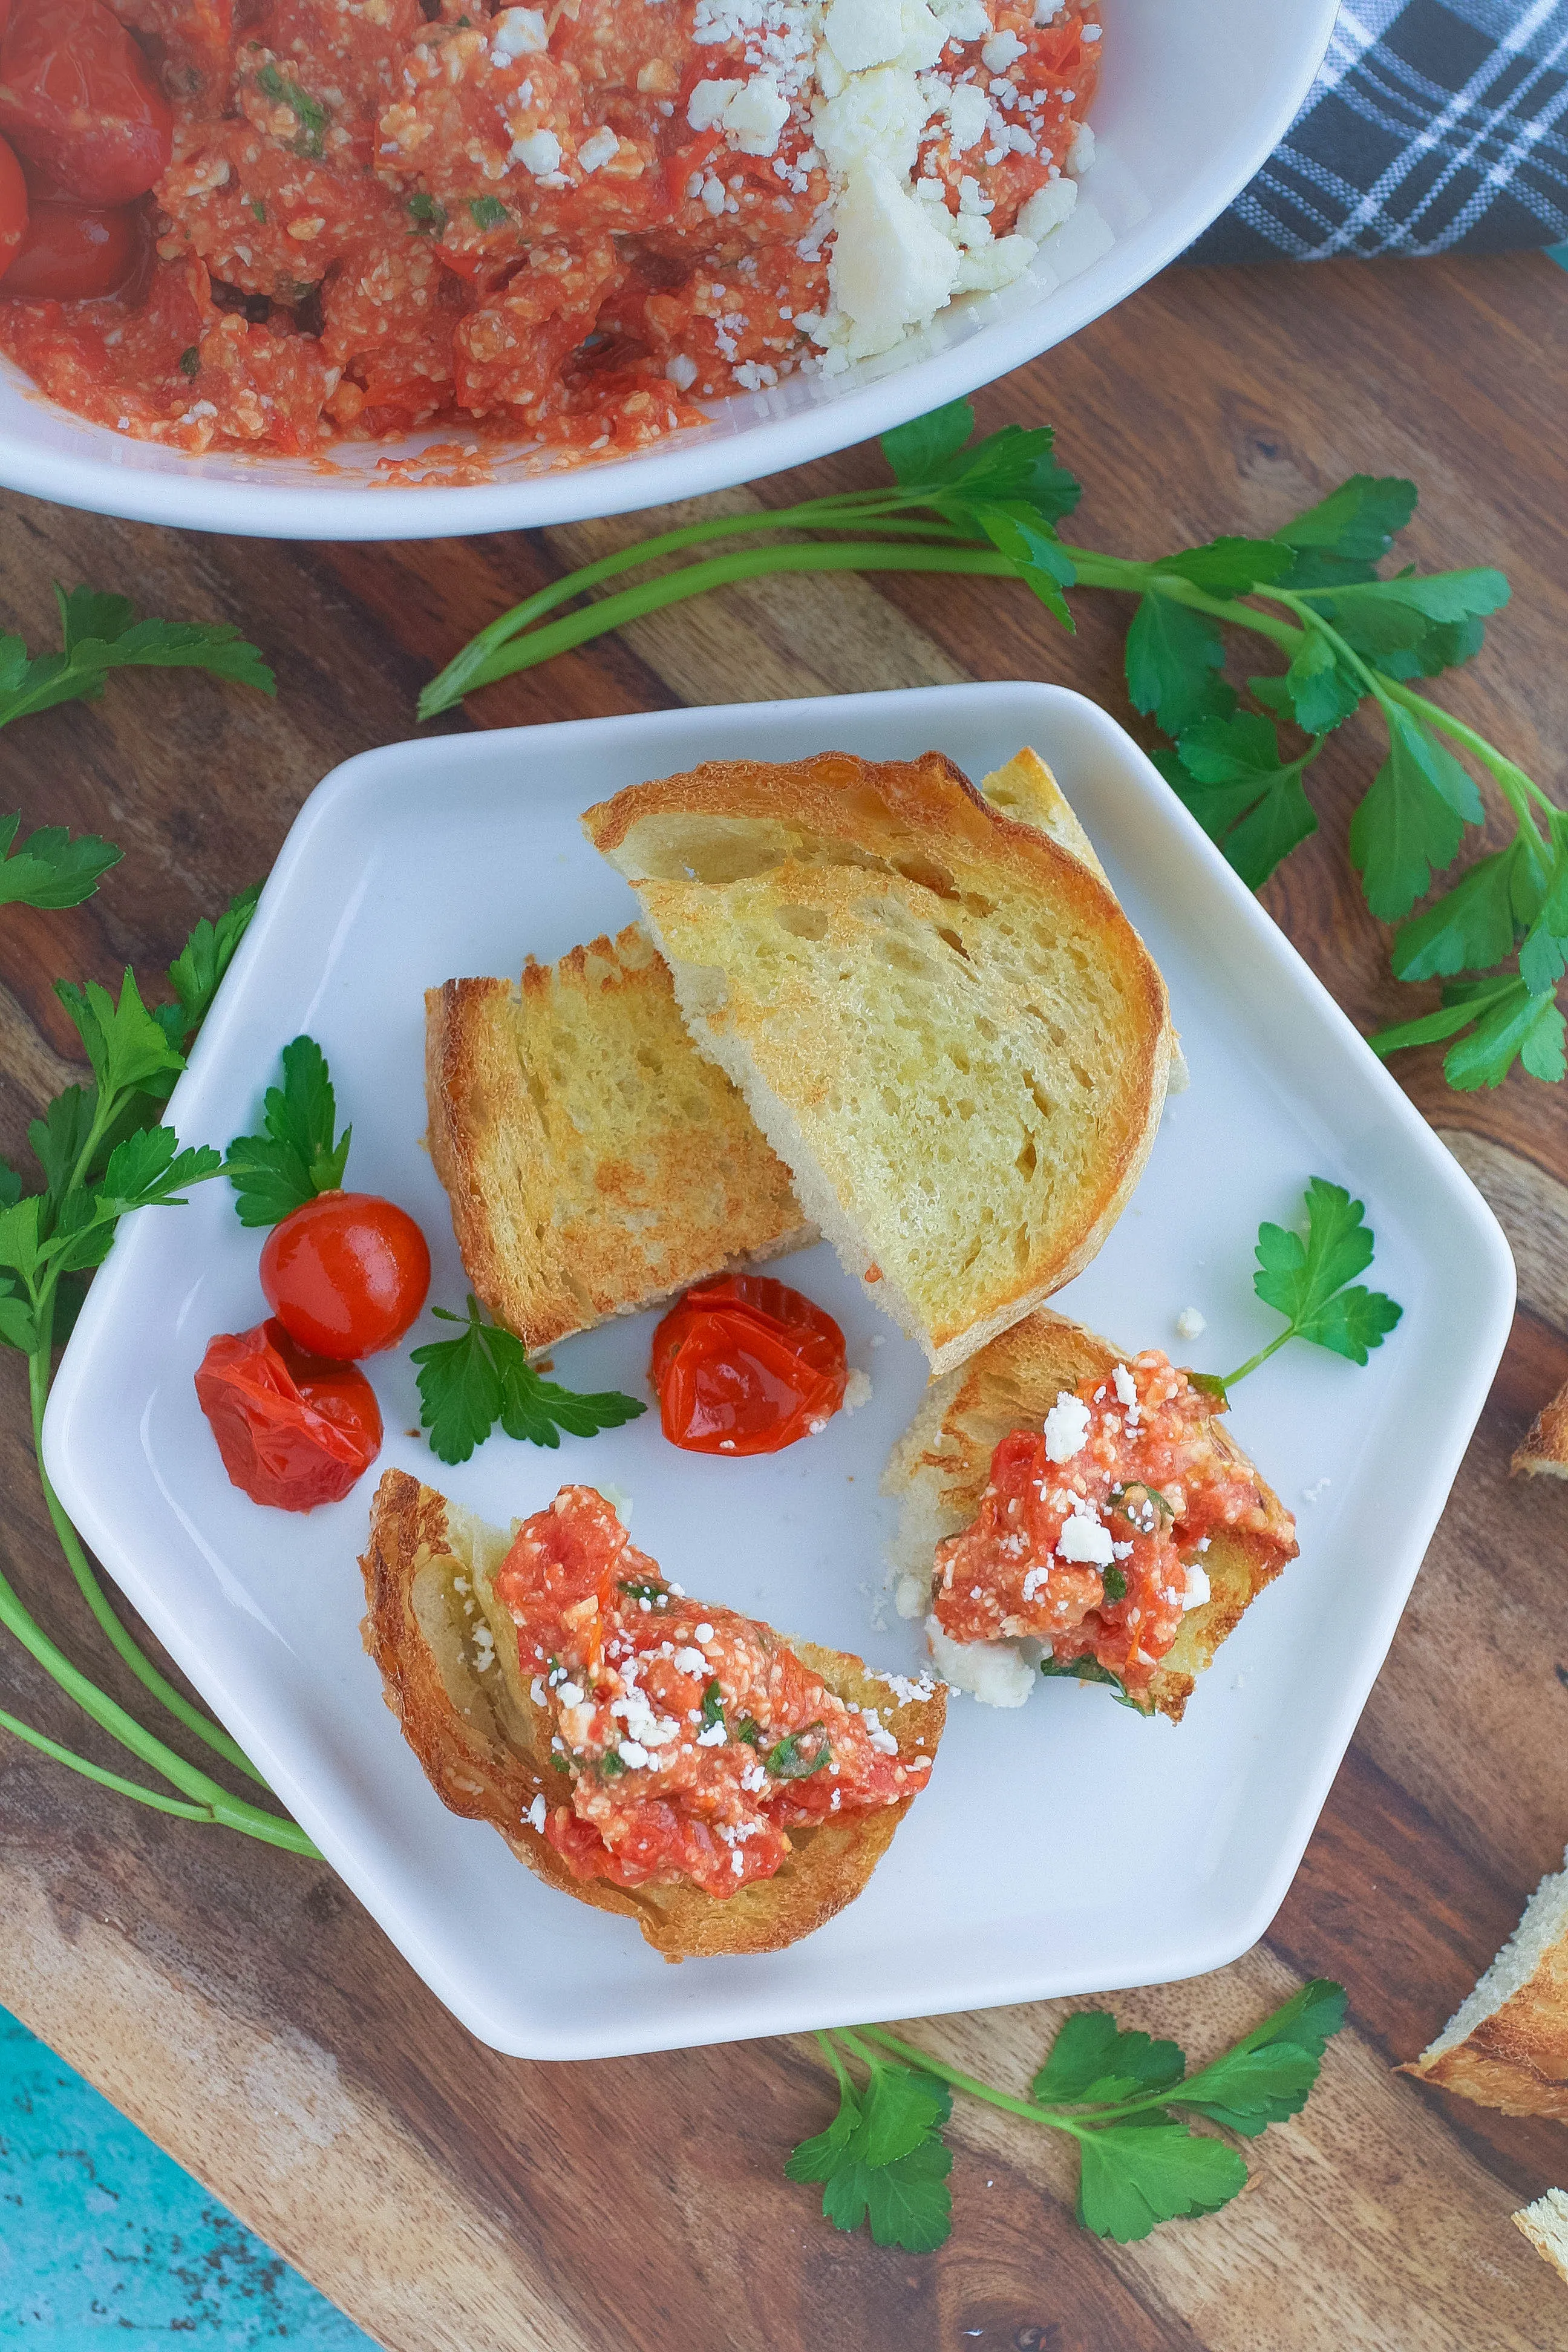 Roasted Tomato & Garlic and Feta Spread makes a fabulous (and simple) appetizer. Roasted Tomato & Garlic and Feta Spread is easy to make and share as an appetizer or snack.